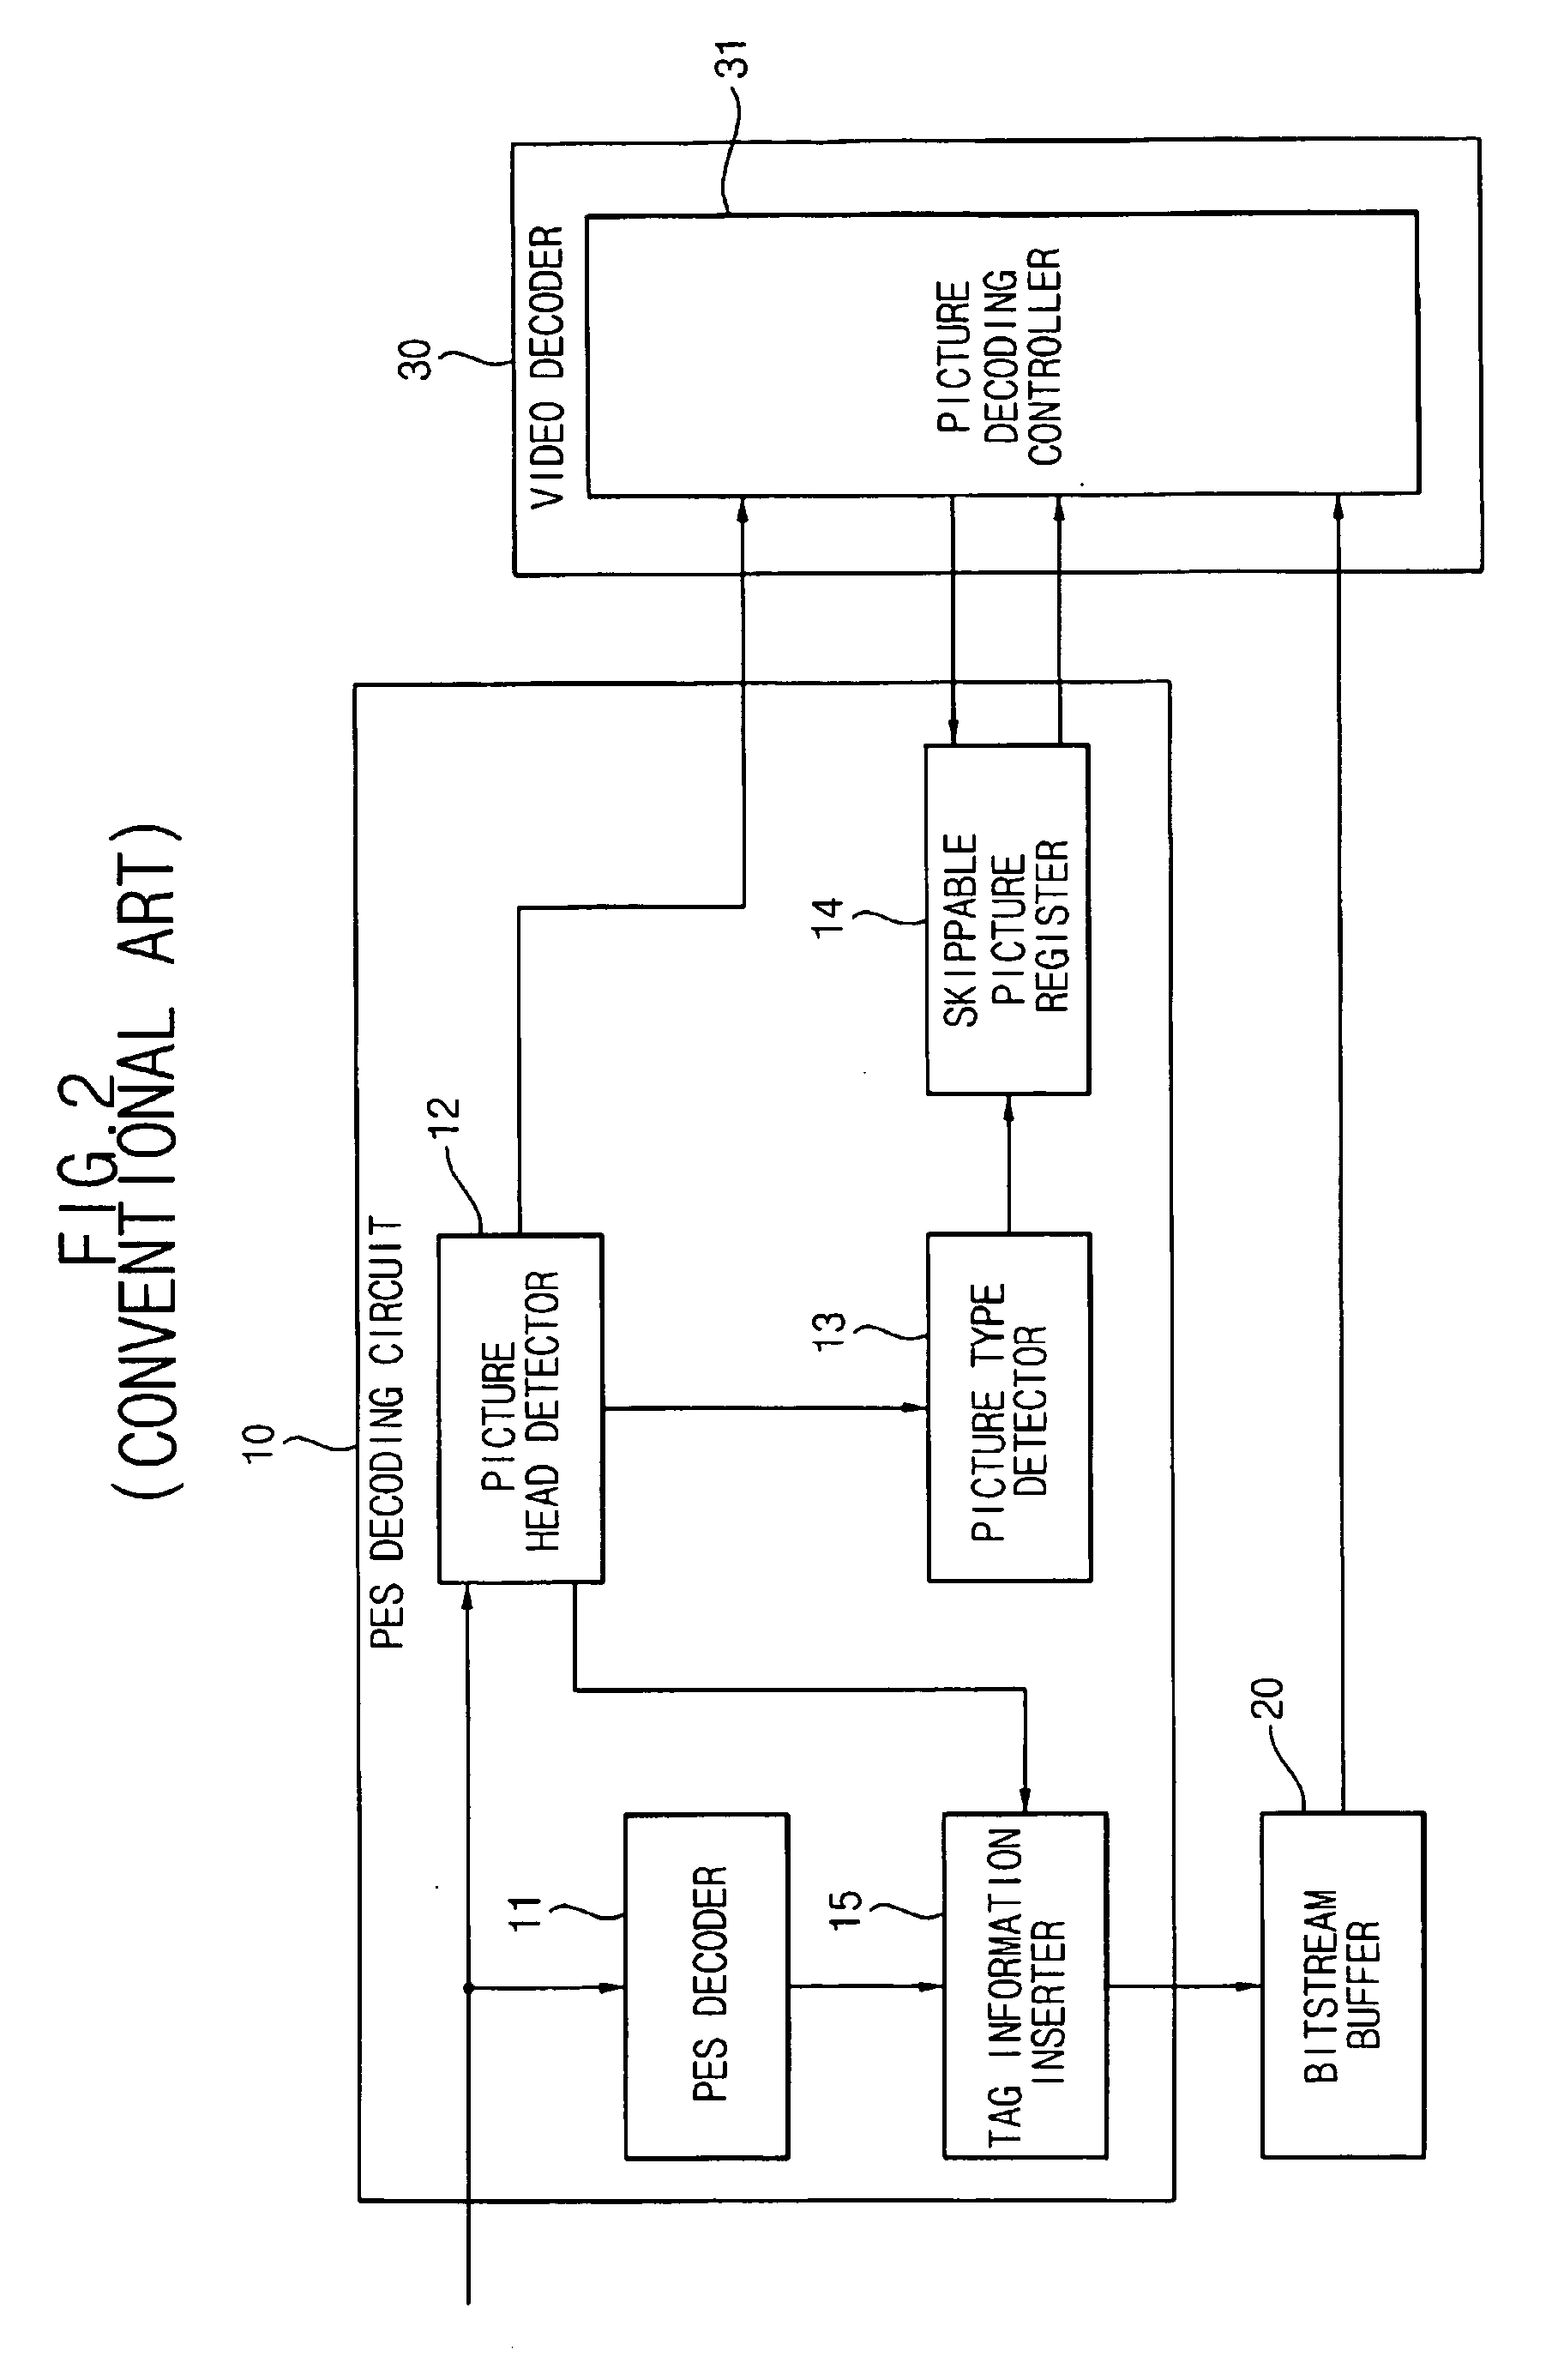 Method and apparatus for skipping pictures